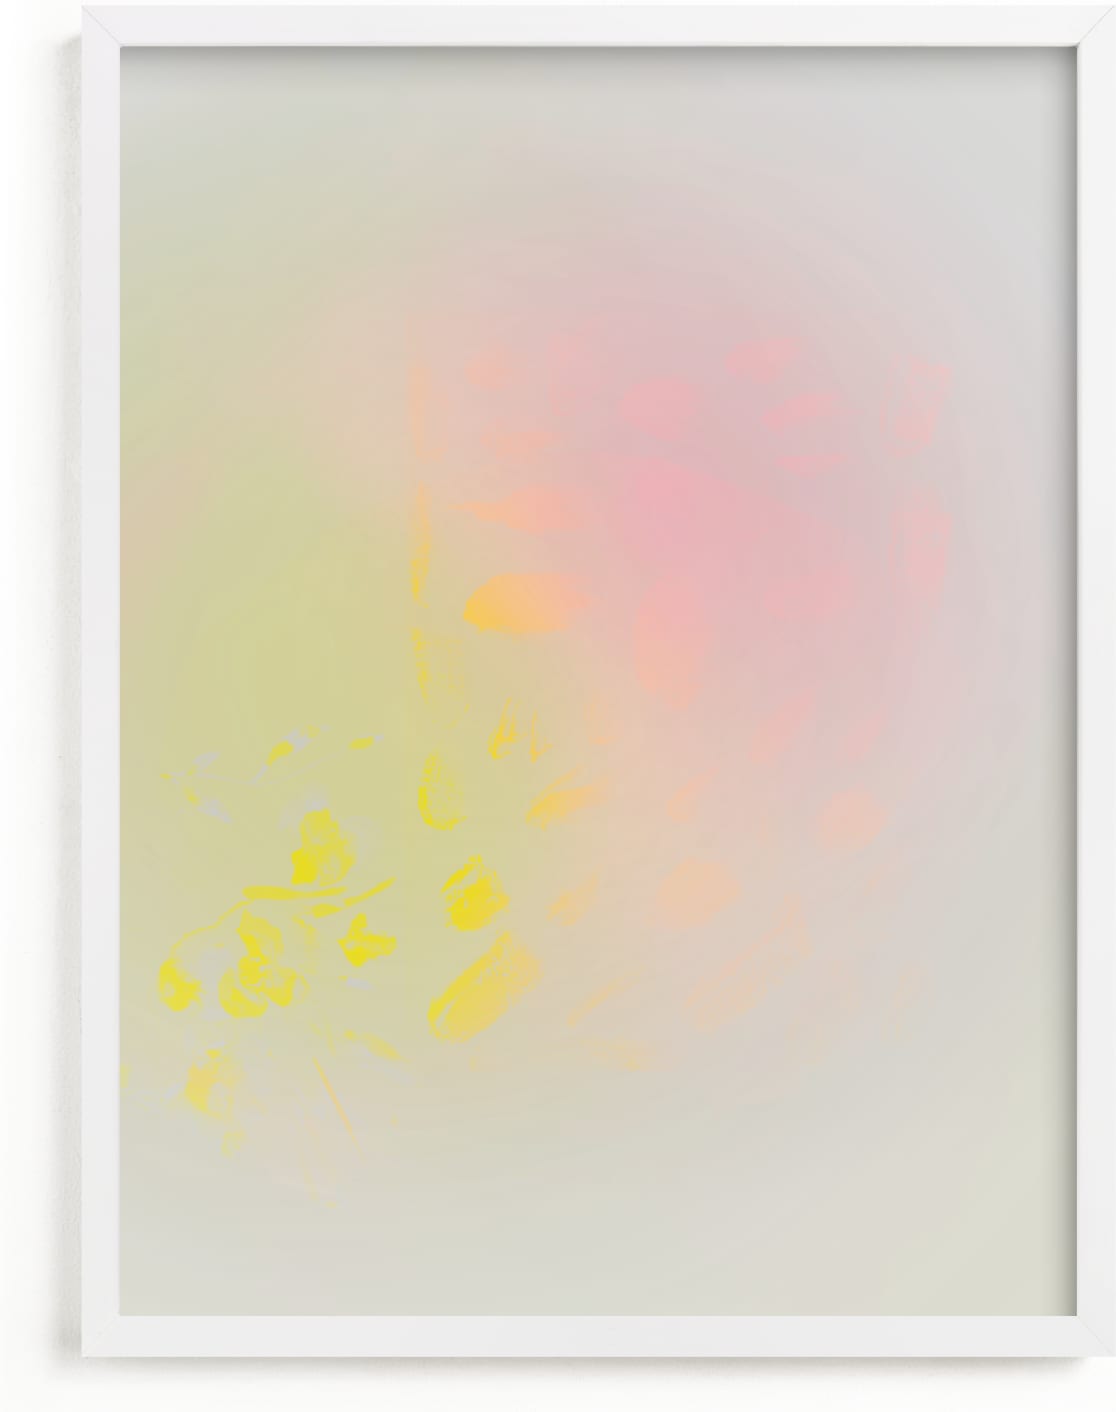 This is a yellow, grey, pink art by Lori Wemple called Bare.